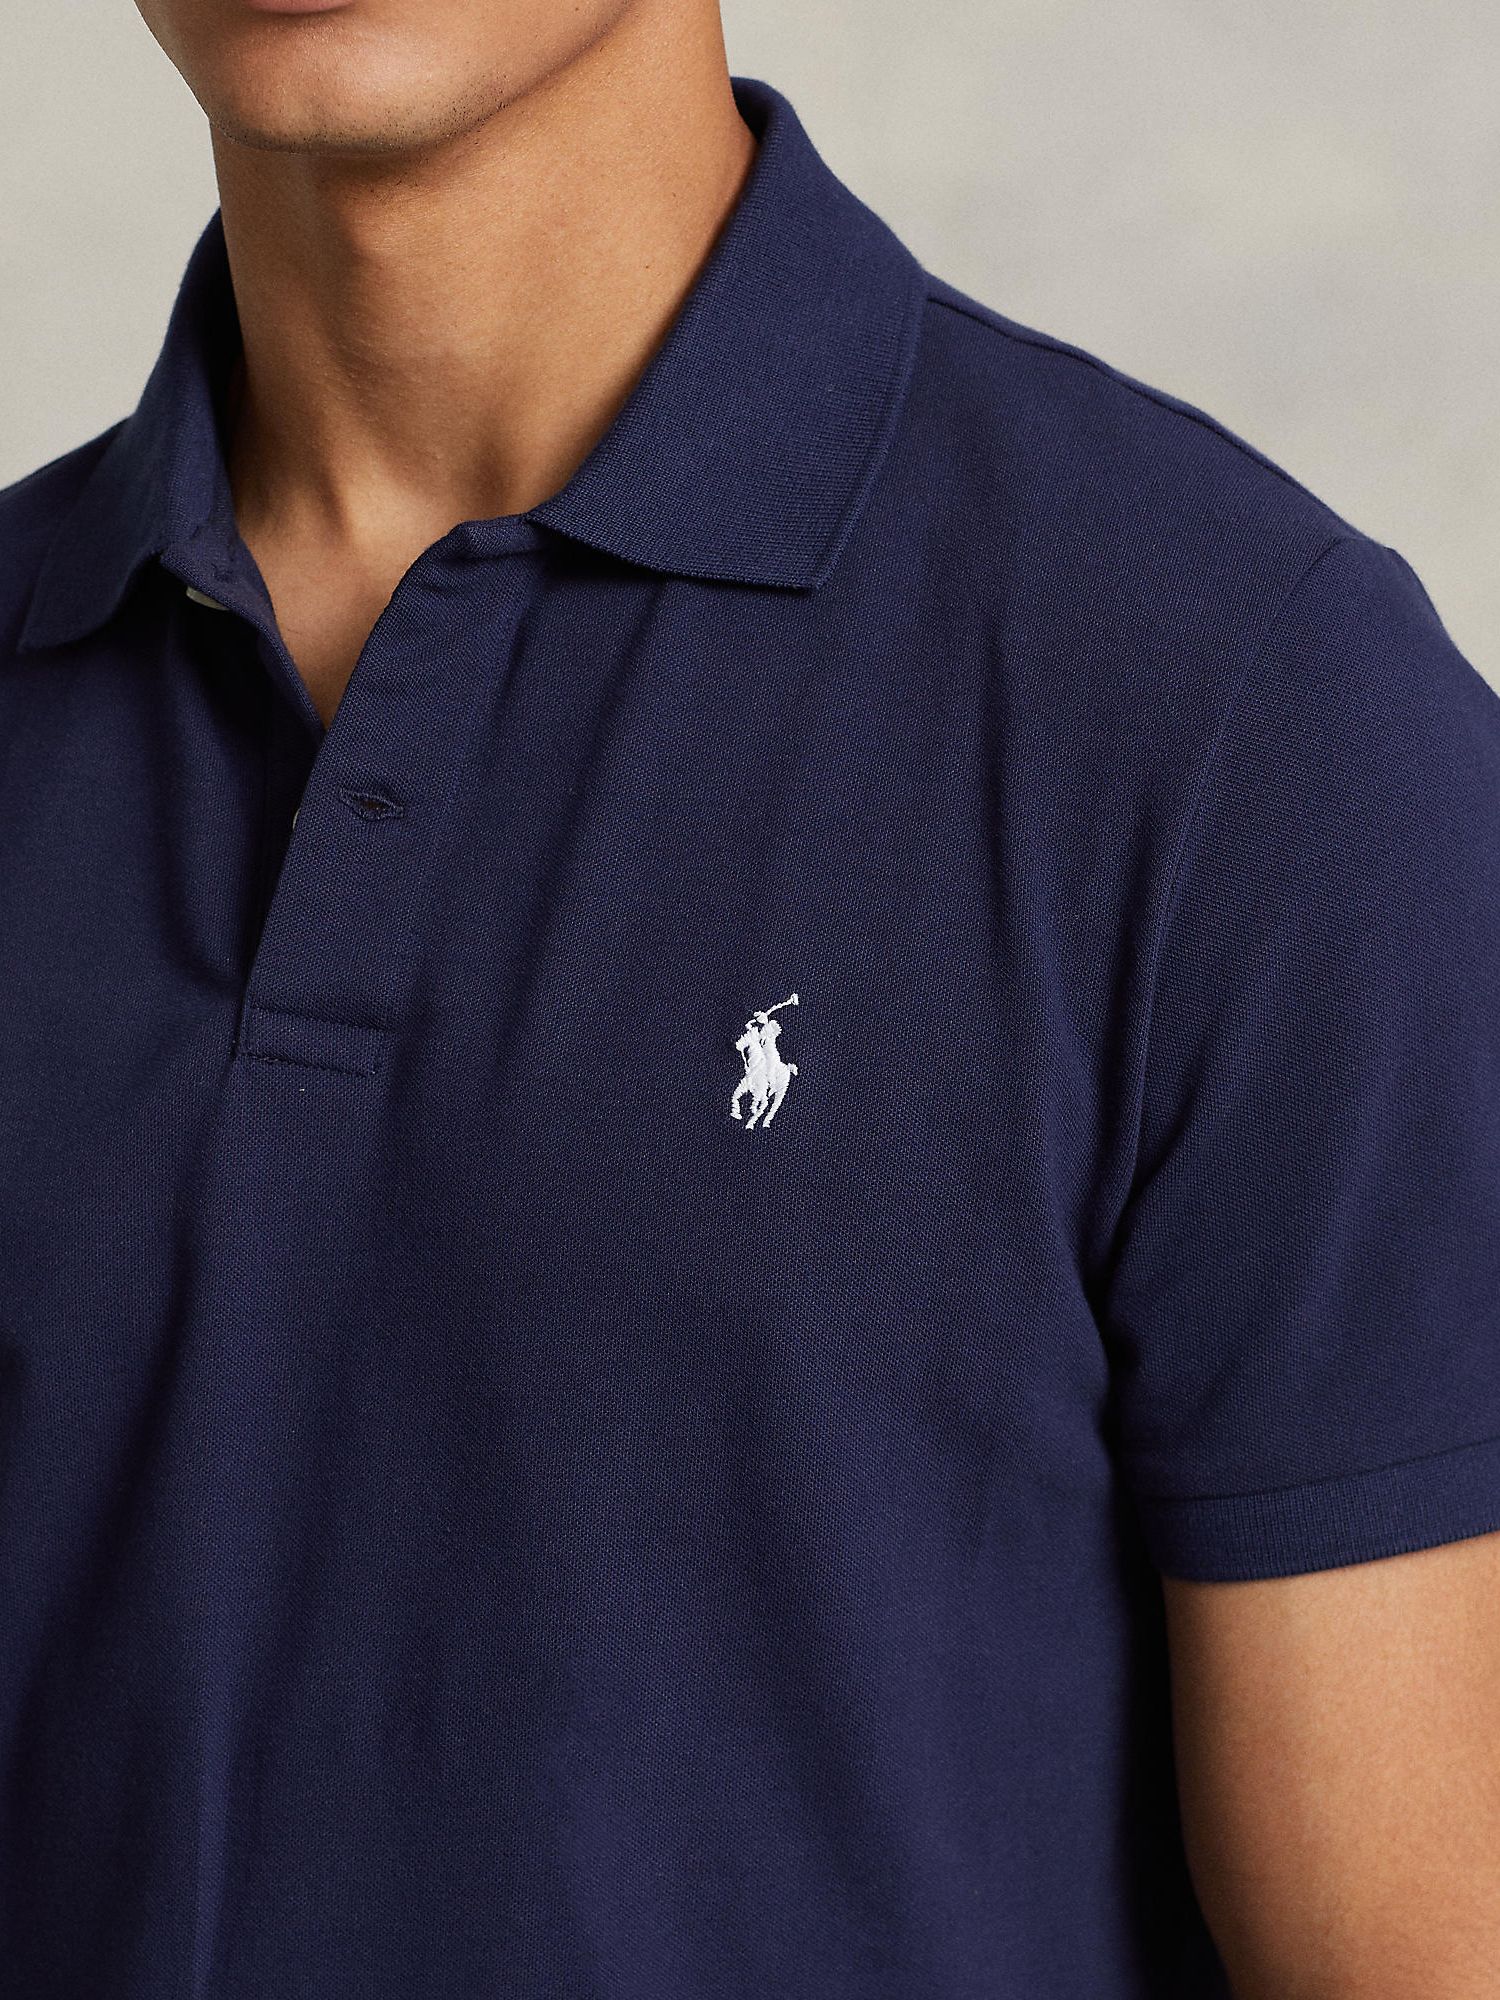 fax Oxidar Disfraces Polo Golf by Ralph Lauren Polo Shirt, French Navy at John Lewis & Partners